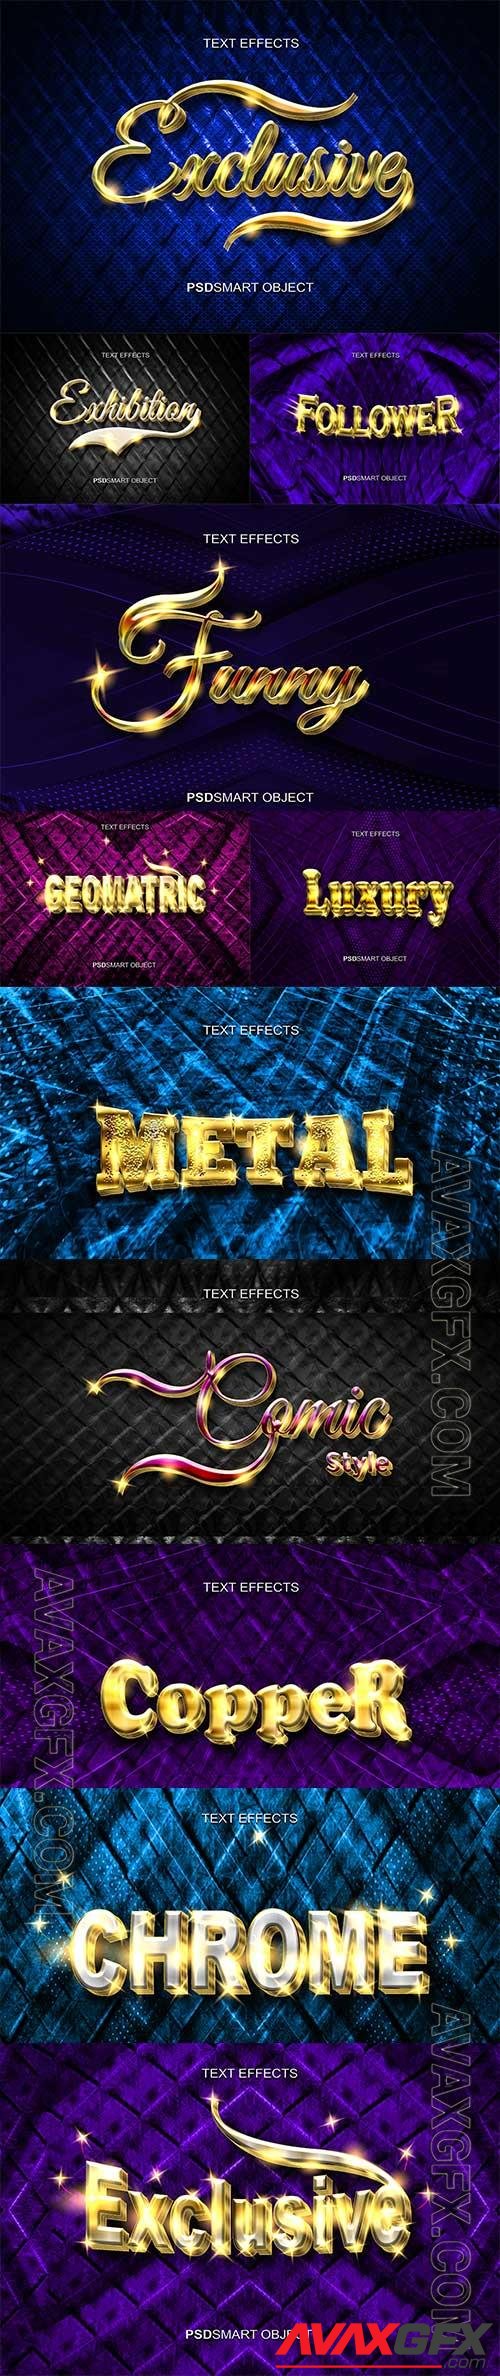 Luxury ecxlusive gold 3d text style mockup psd